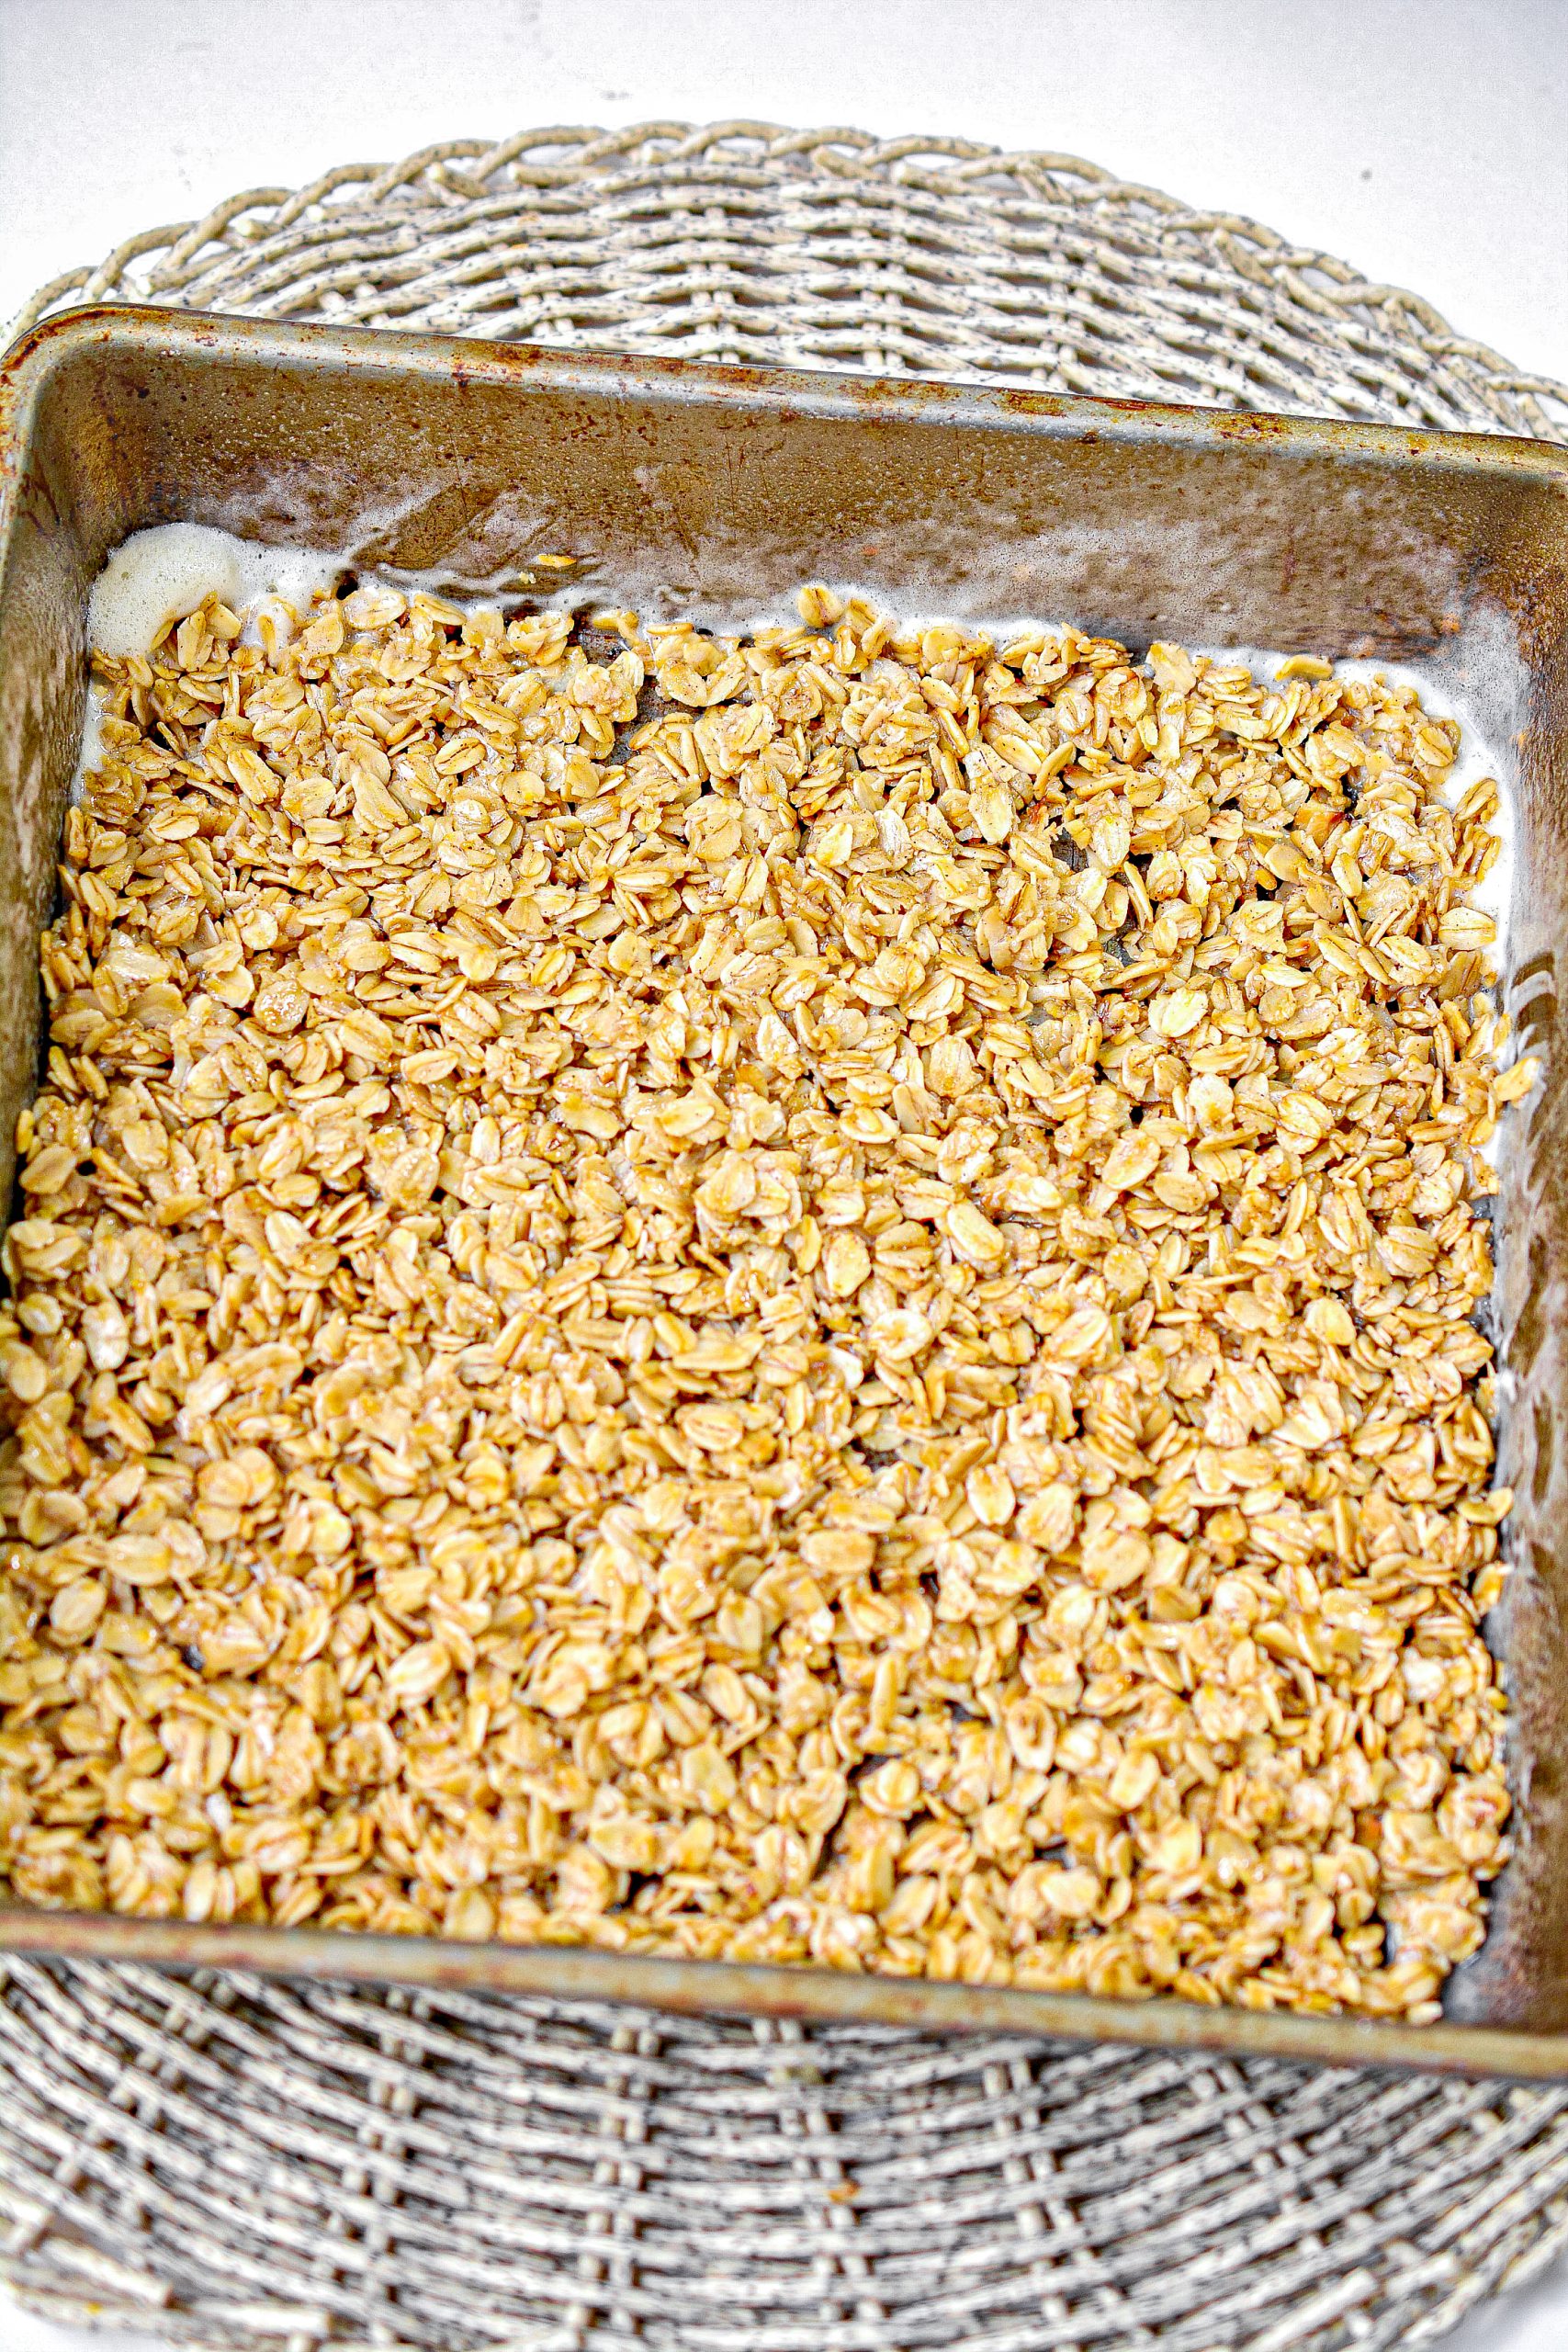 Layer half of the oat mixture in the bottom of a well-greased 9x9 baking dish.